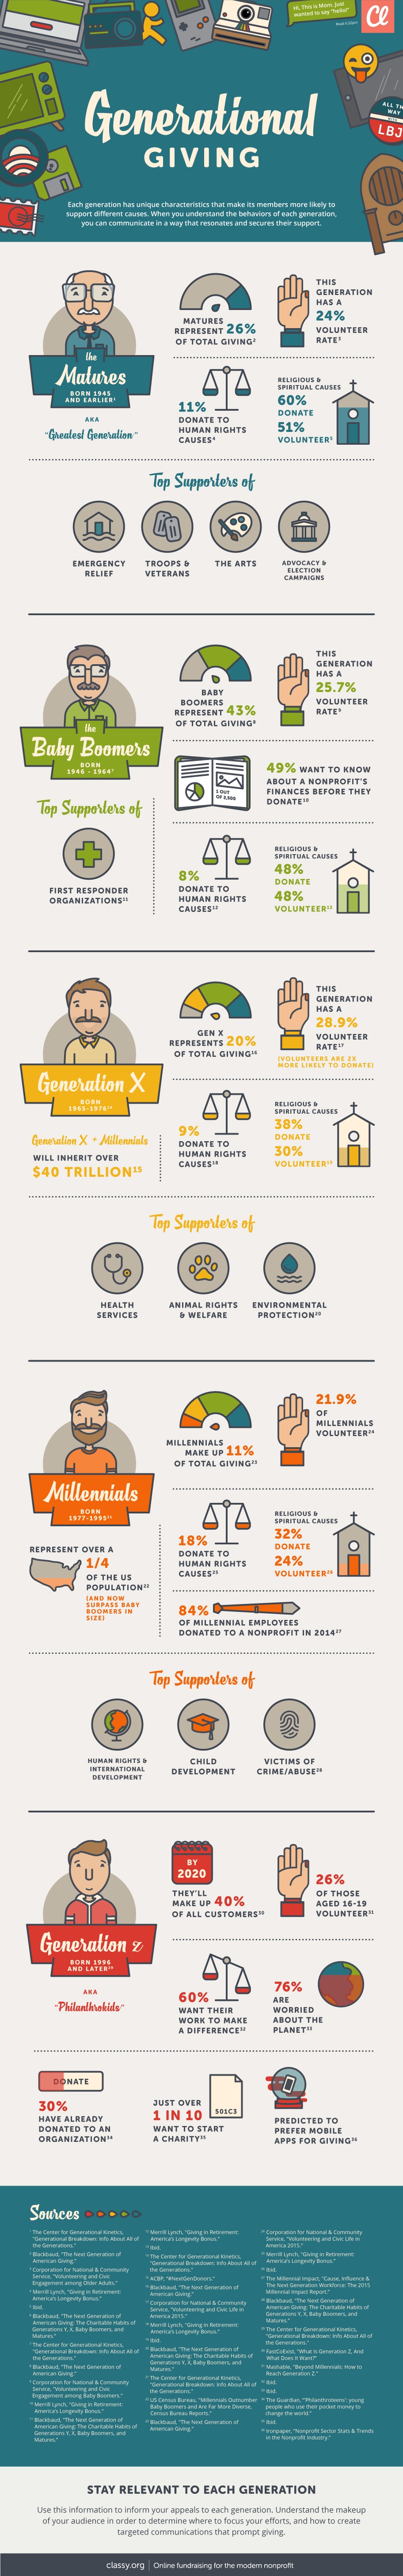 Generational Giving infographic